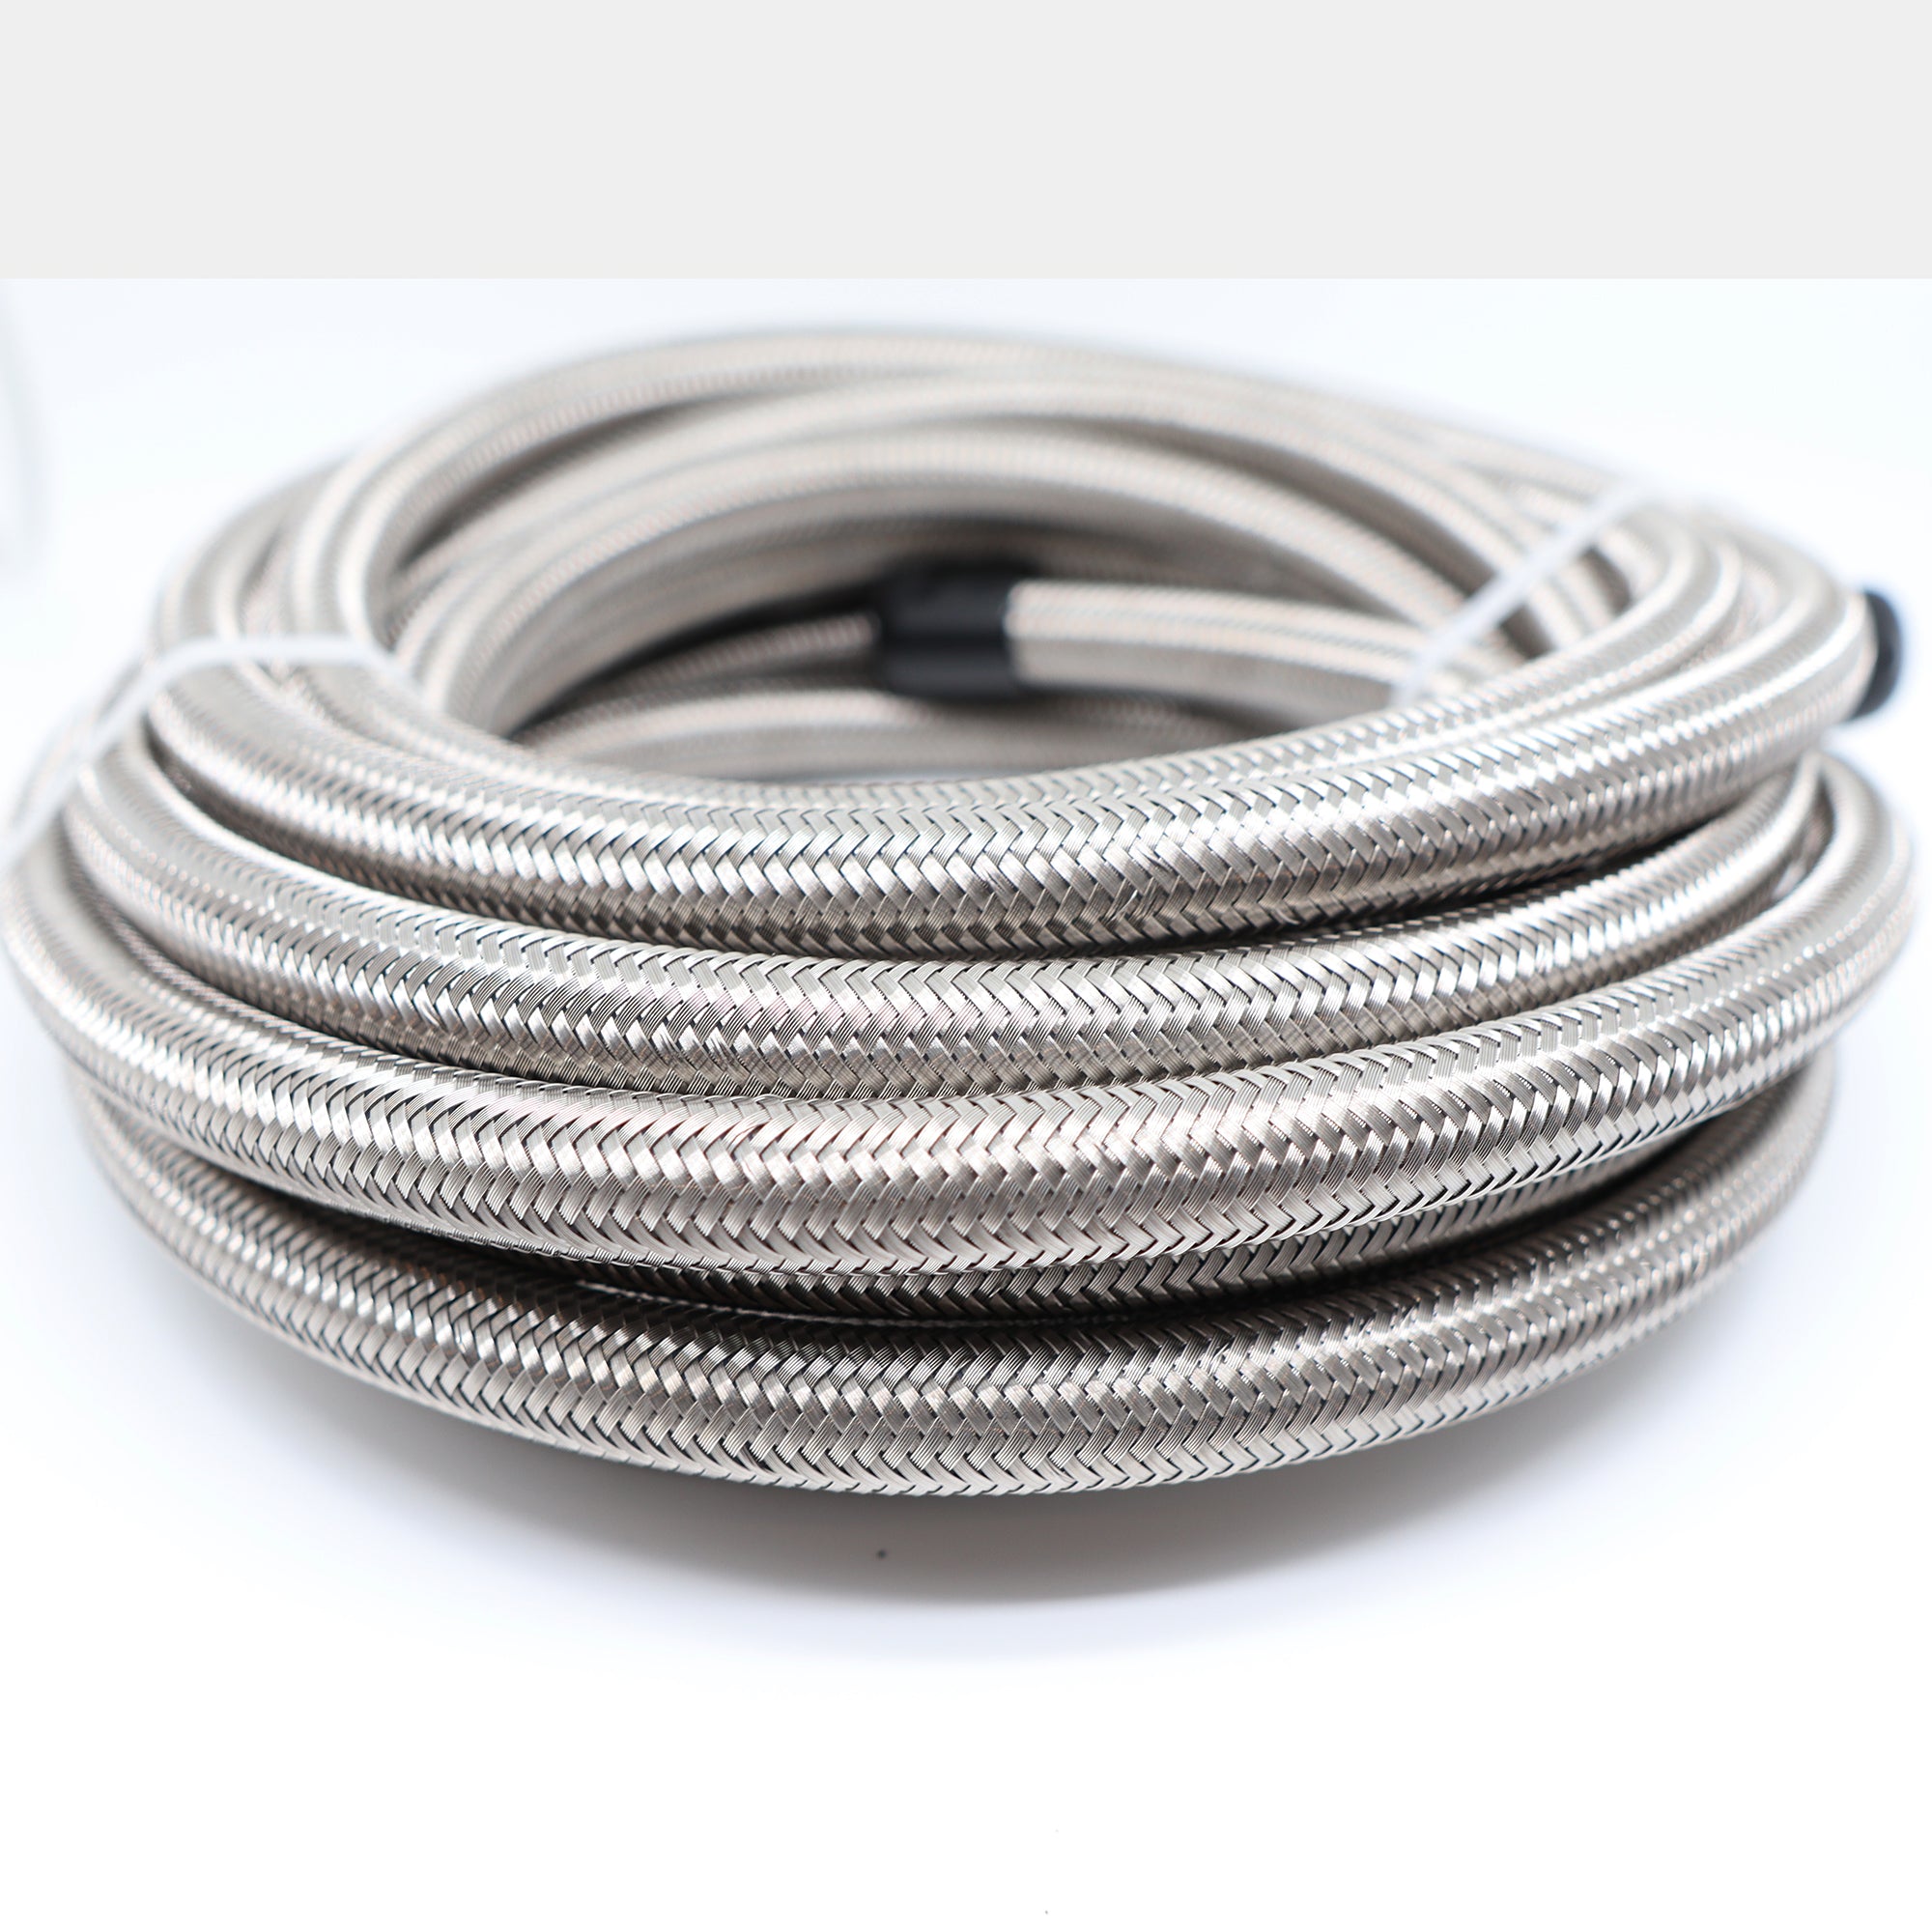 1/4" AN4 Stainless Steel Braided Fuel Oil Gas Line Hose - 20FT